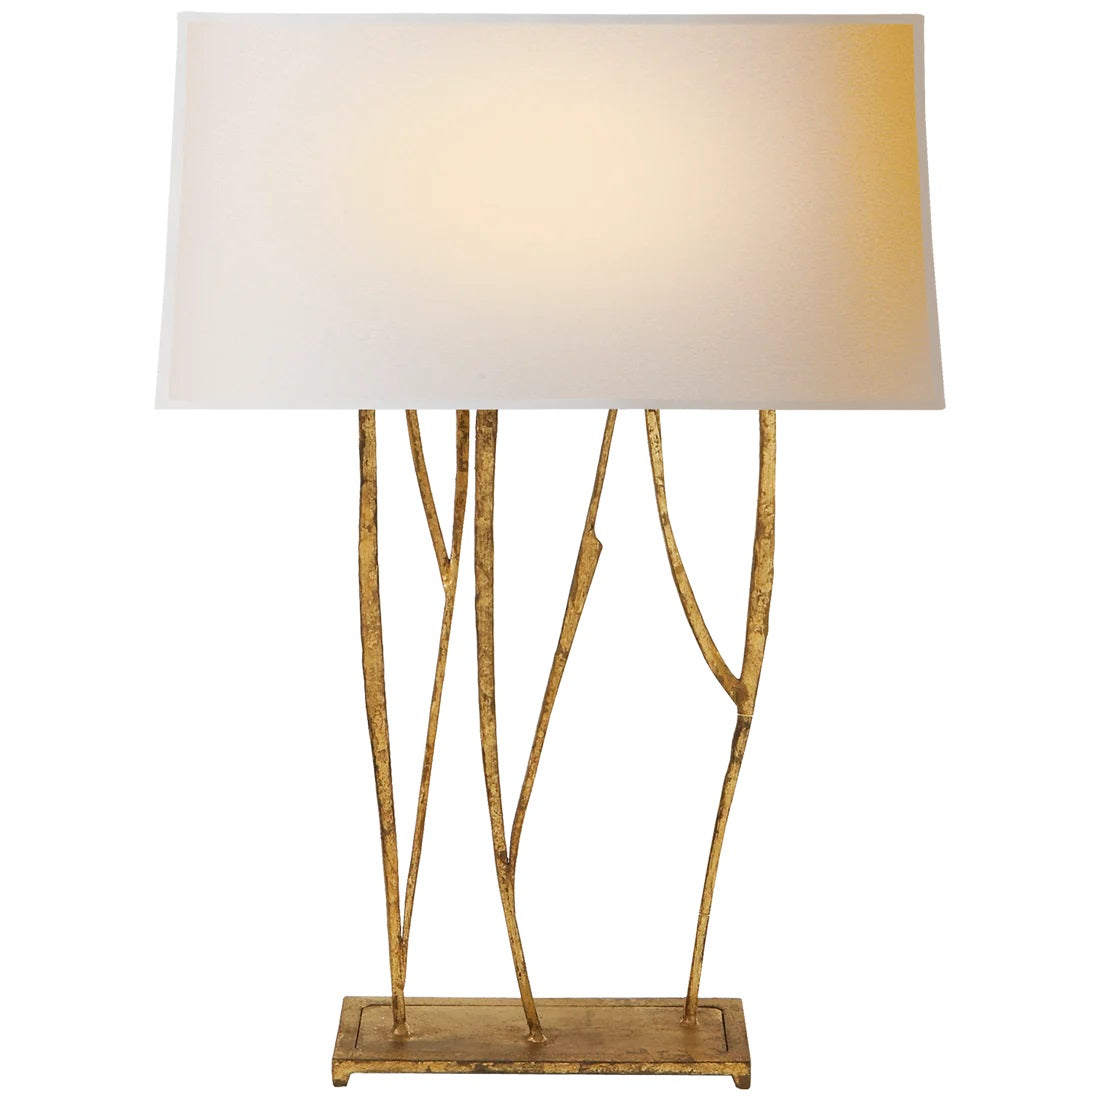 Gold lamp with tree branch design with off white parchment shade